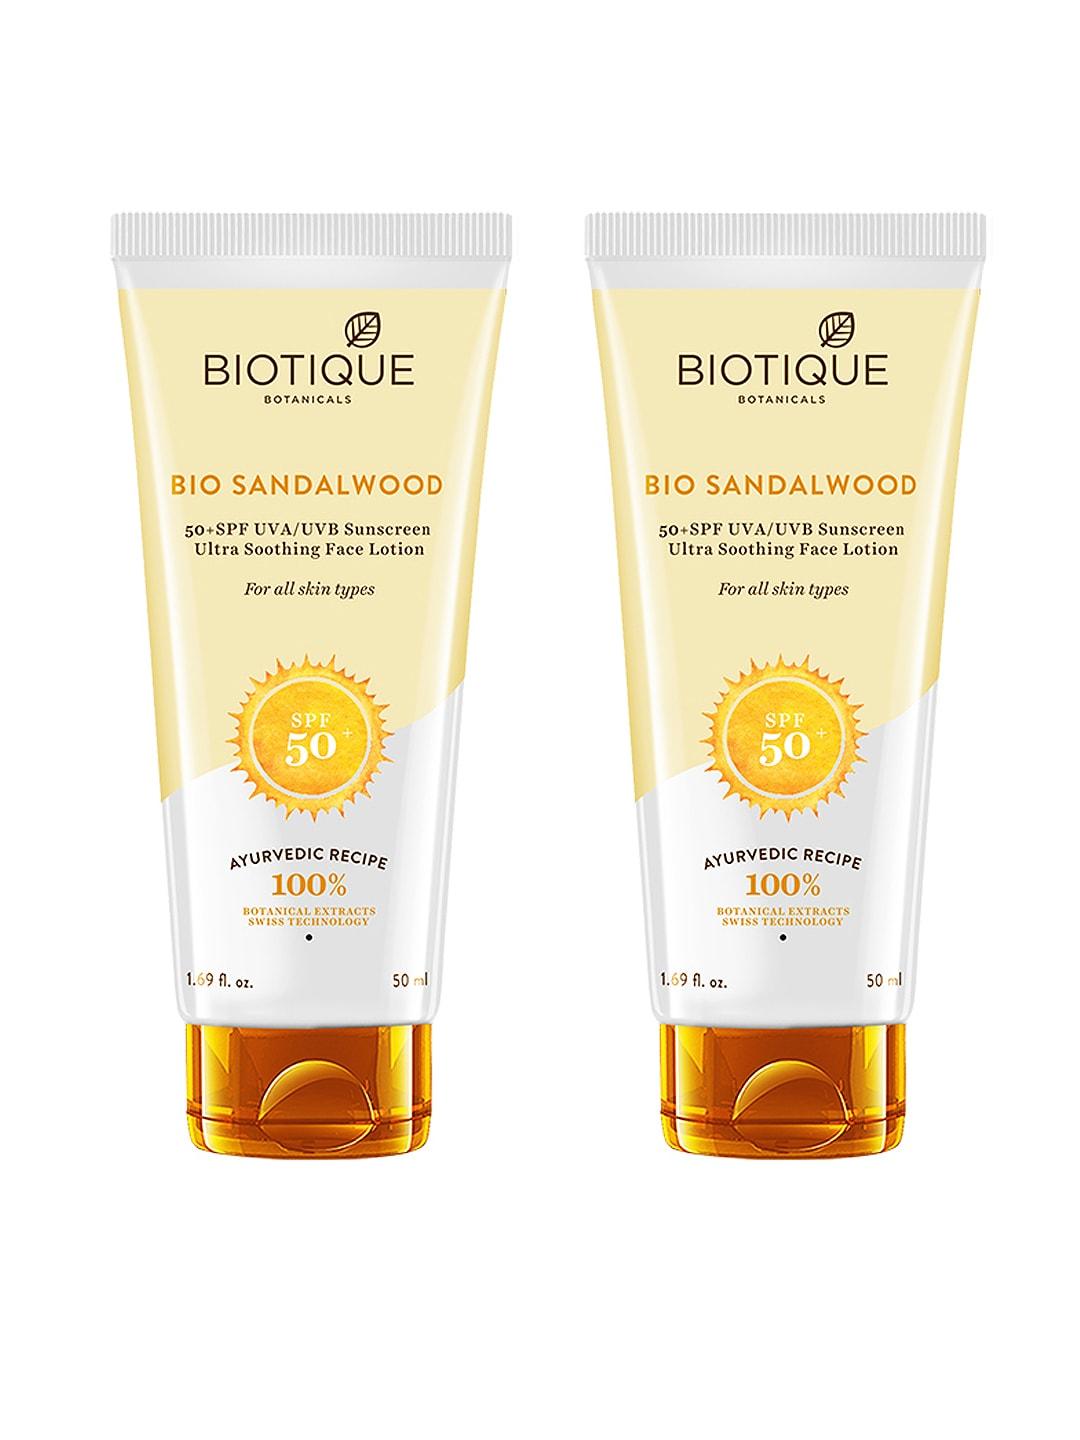 Biotique Set of 2 Bio Sandalwood SPF 50+ Ultra Soothing Sunscreen Lotions